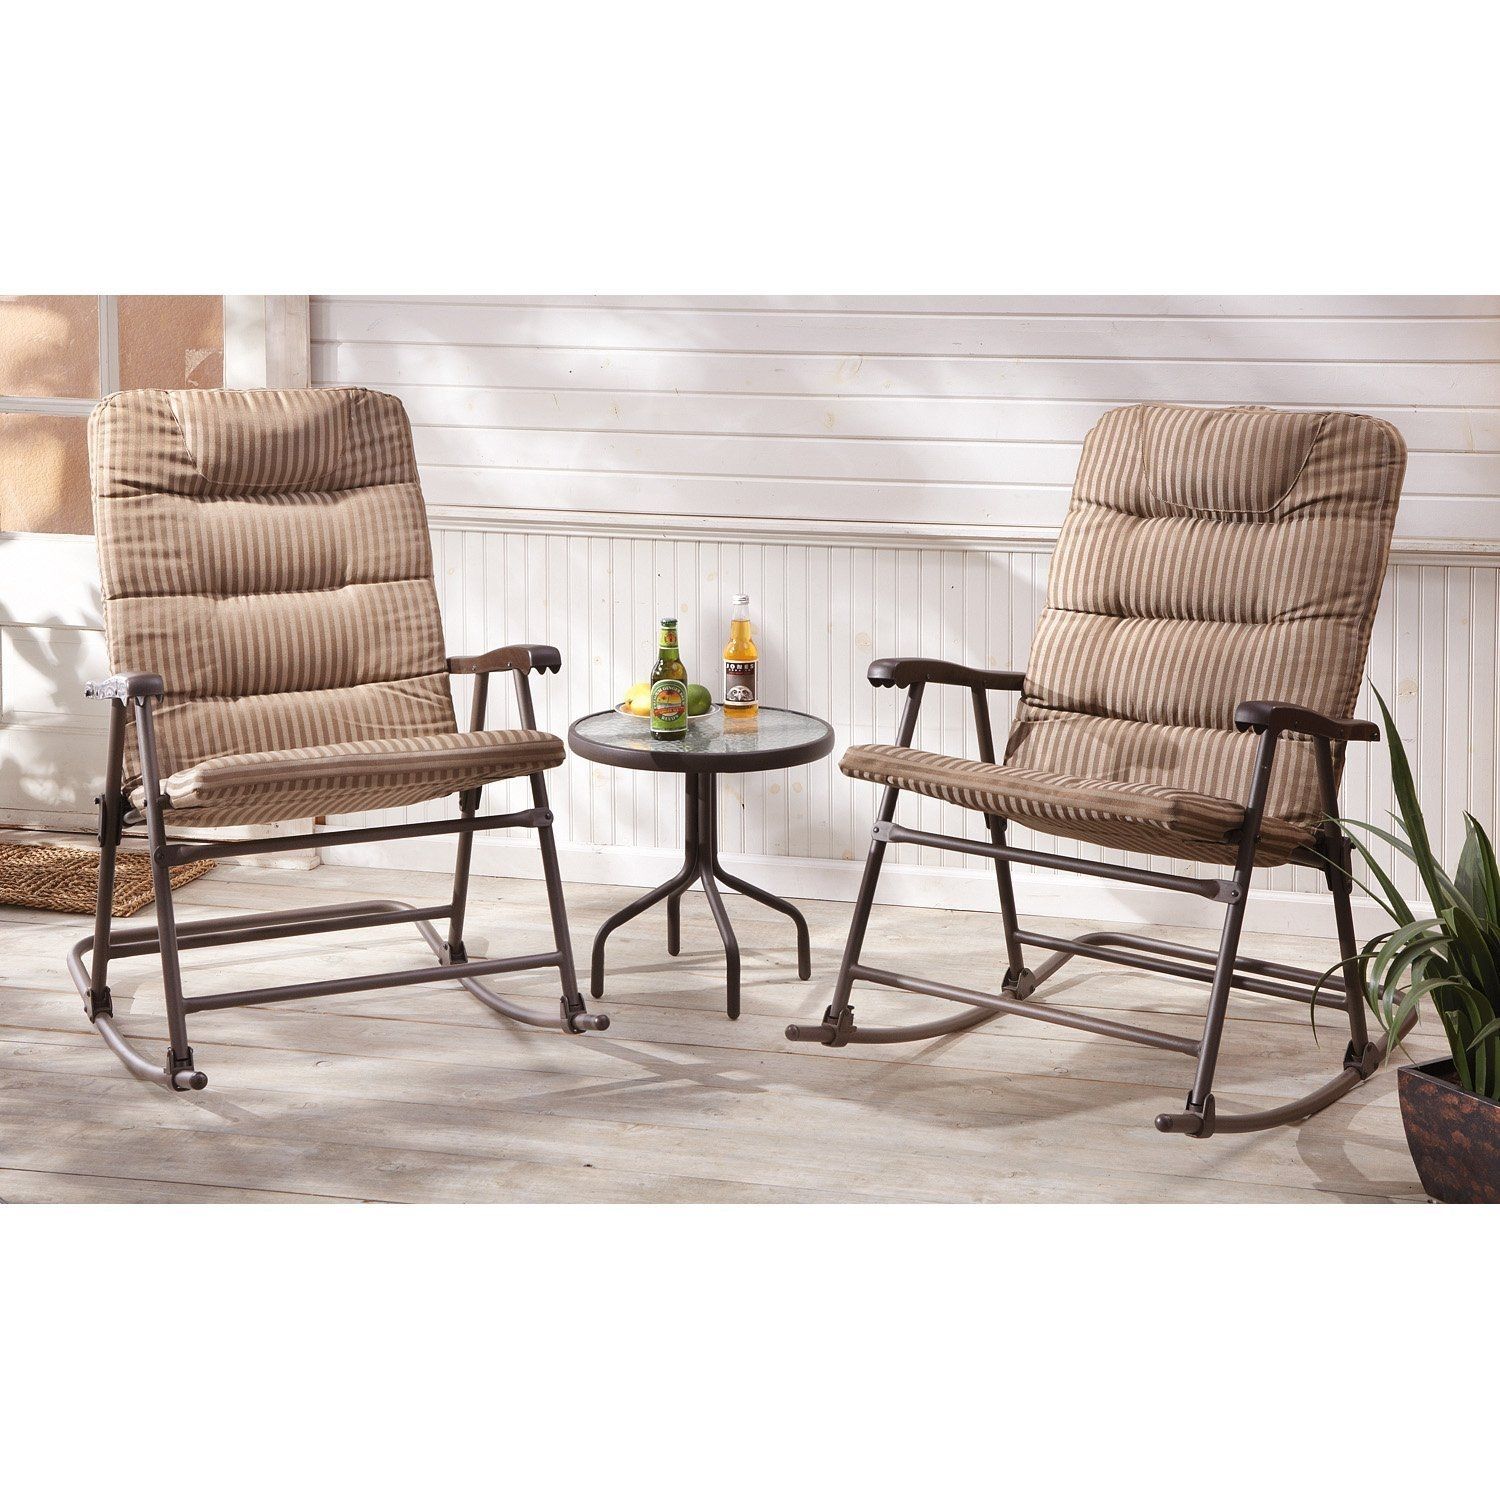 Featured Photo of 15 Best Padded Patio Rocking Chairs